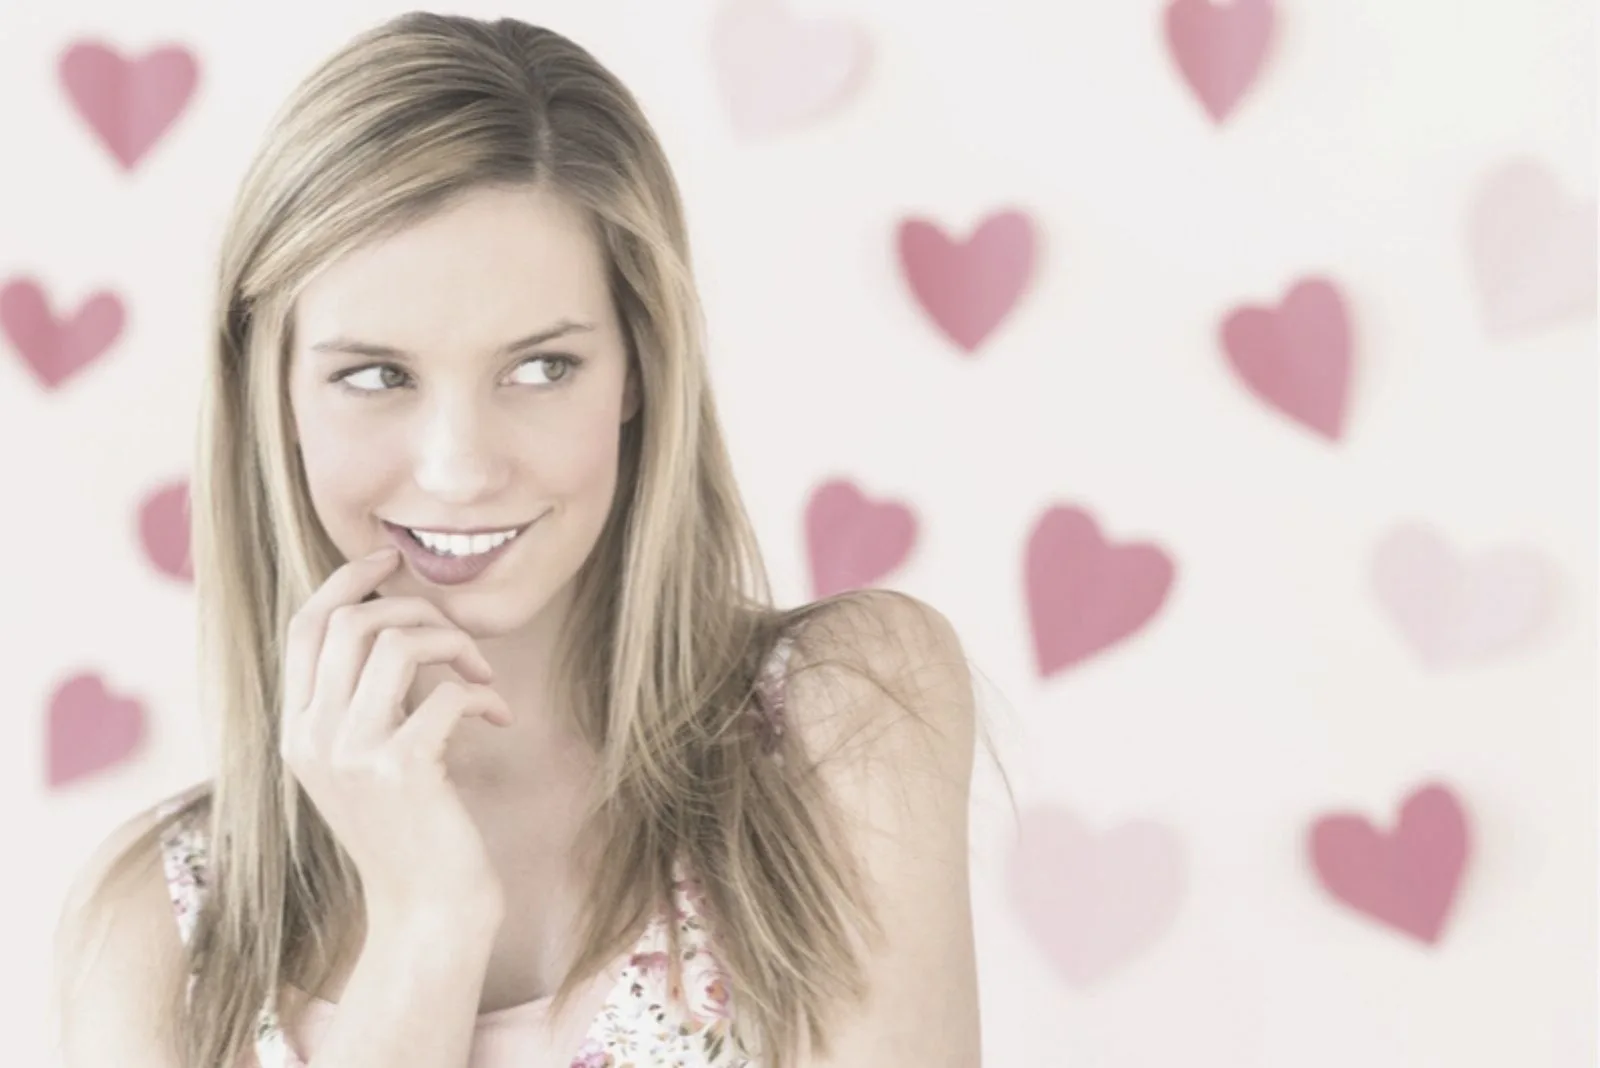 young woman biting lip and looking away standing near the white wall with pink hearts